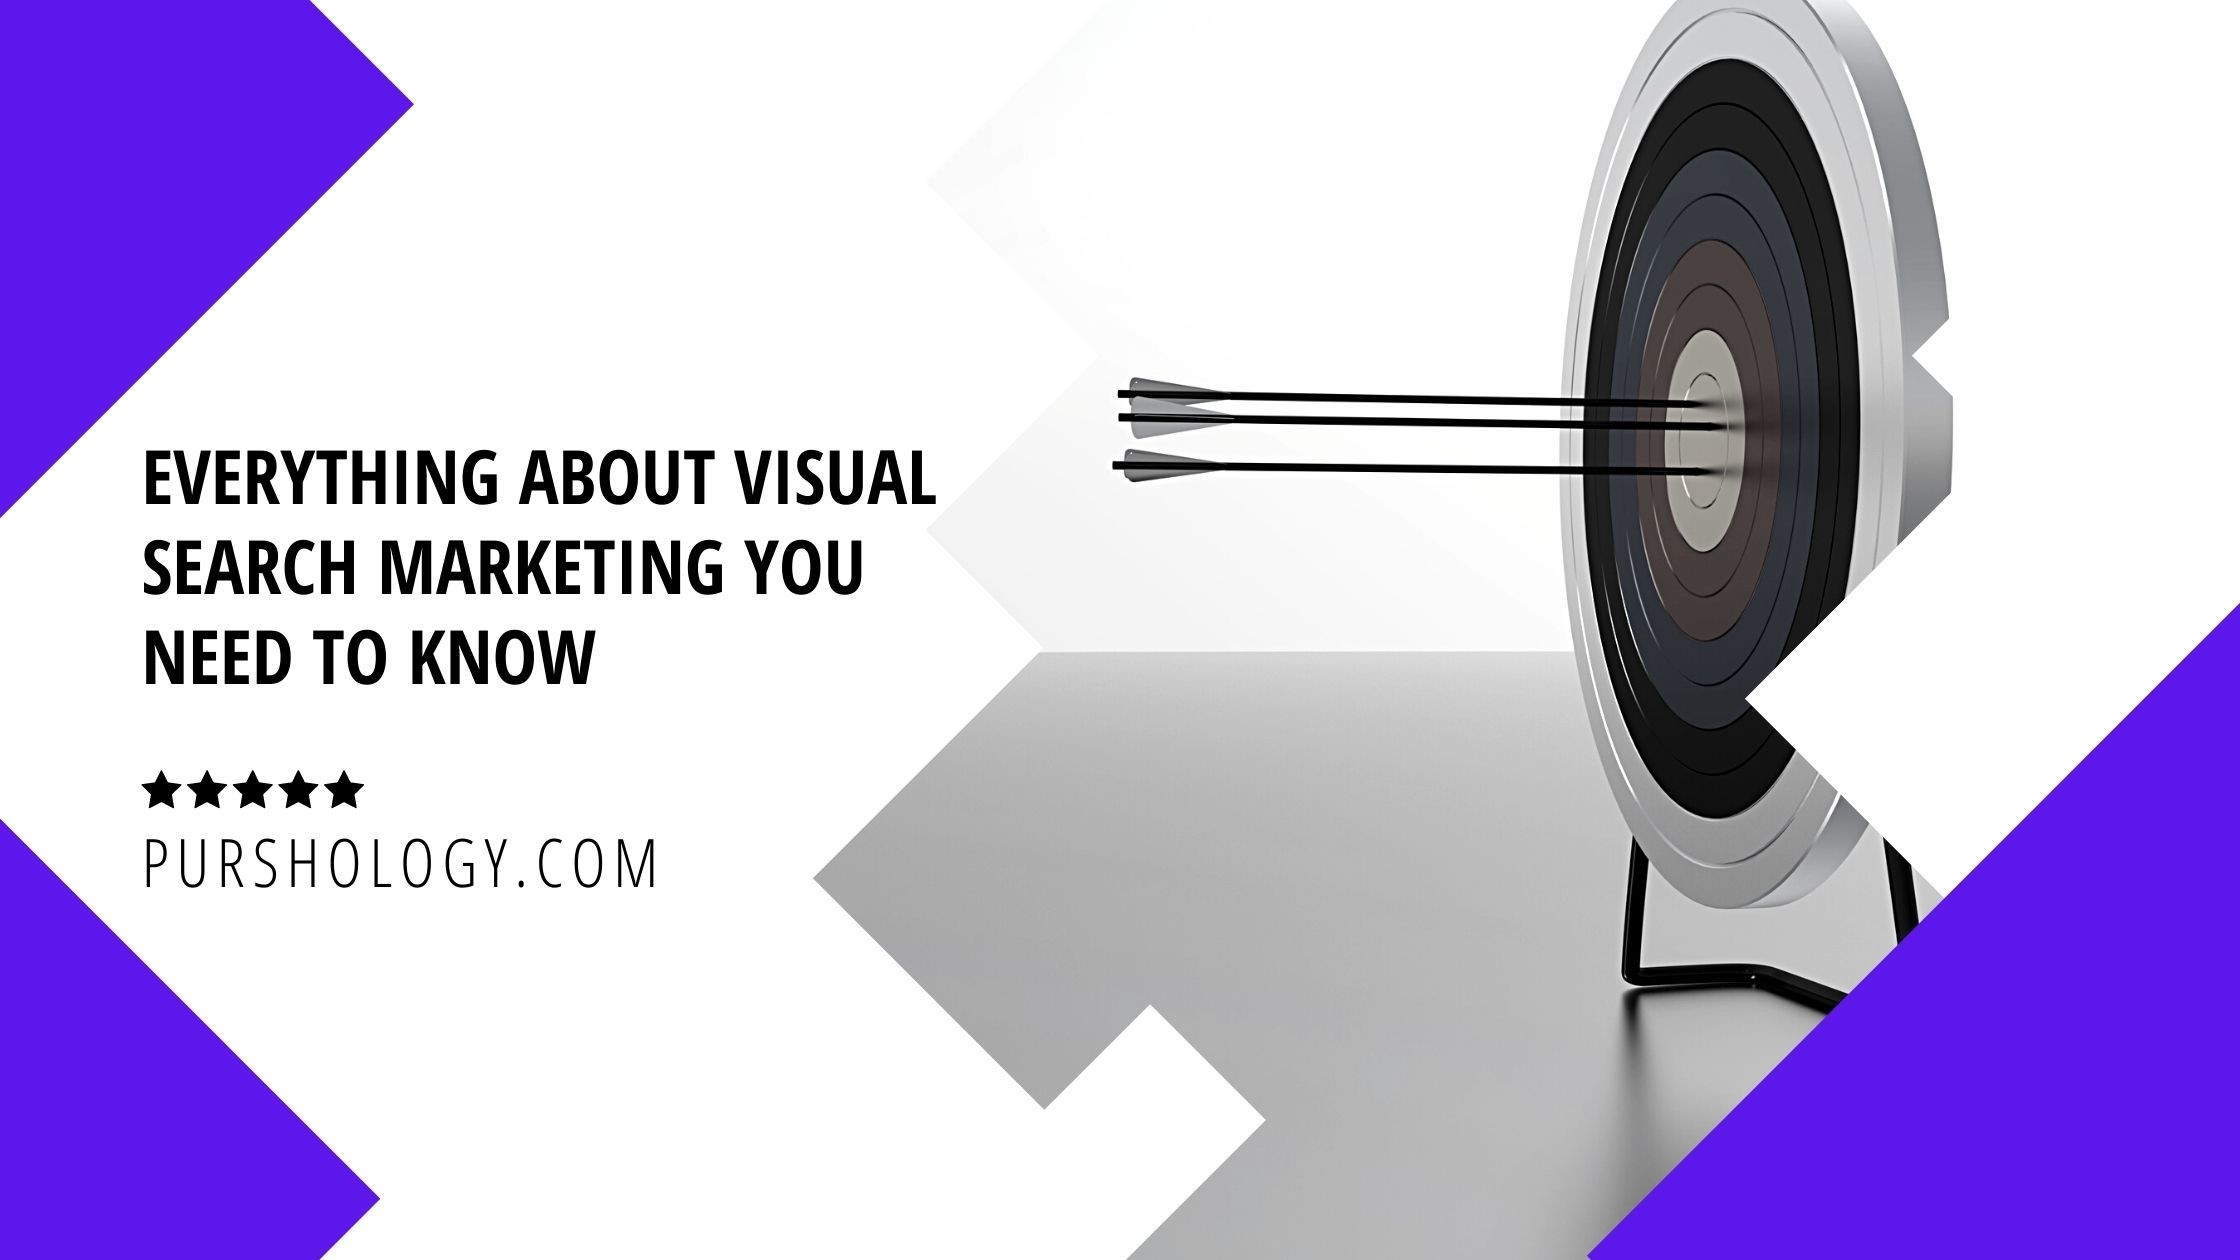 Everything About Visual Search Marketing You Need to Know